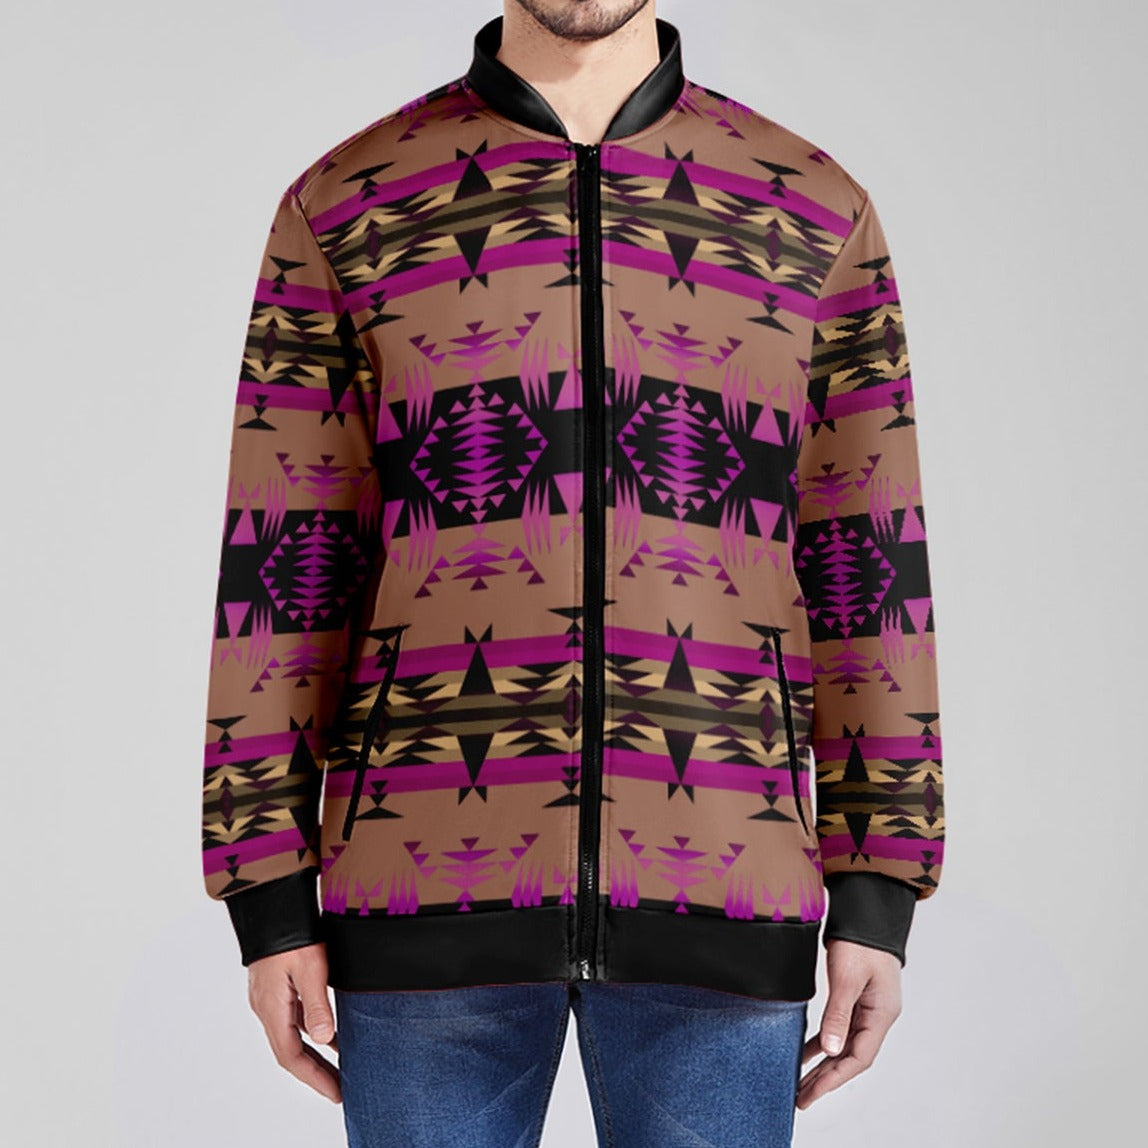 Between the Mountains Berry Youth Zippered Collared Lightweight Jacket